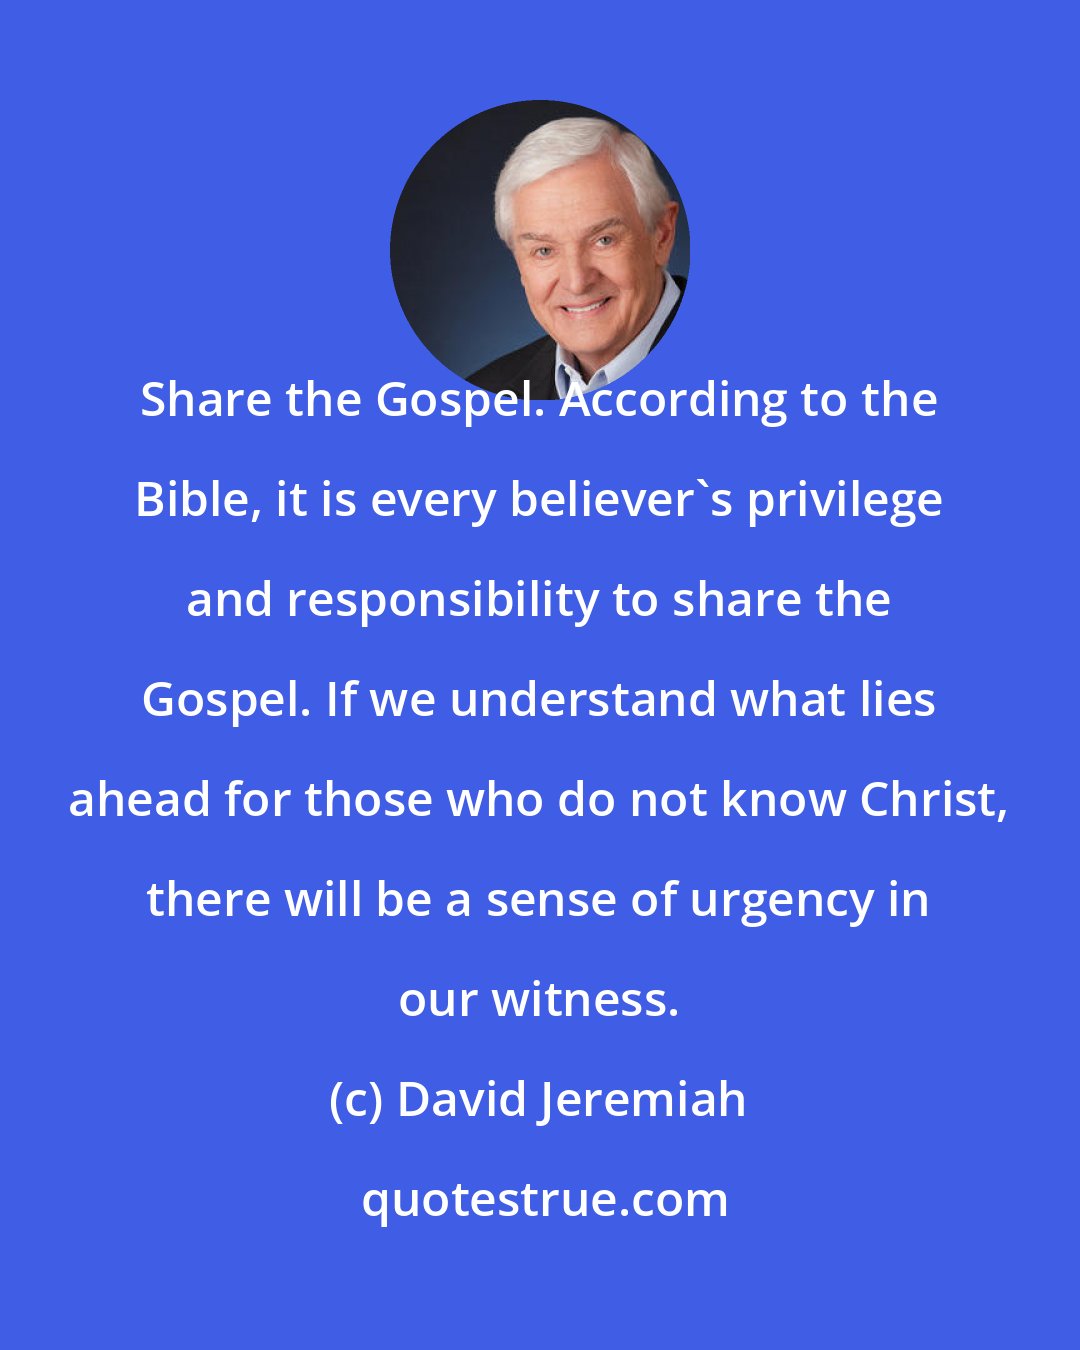 David Jeremiah: Share the Gospel. According to the Bible, it is every believer's privilege and responsibility to share the Gospel. If we understand what lies ahead for those who do not know Christ, there will be a sense of urgency in our witness.